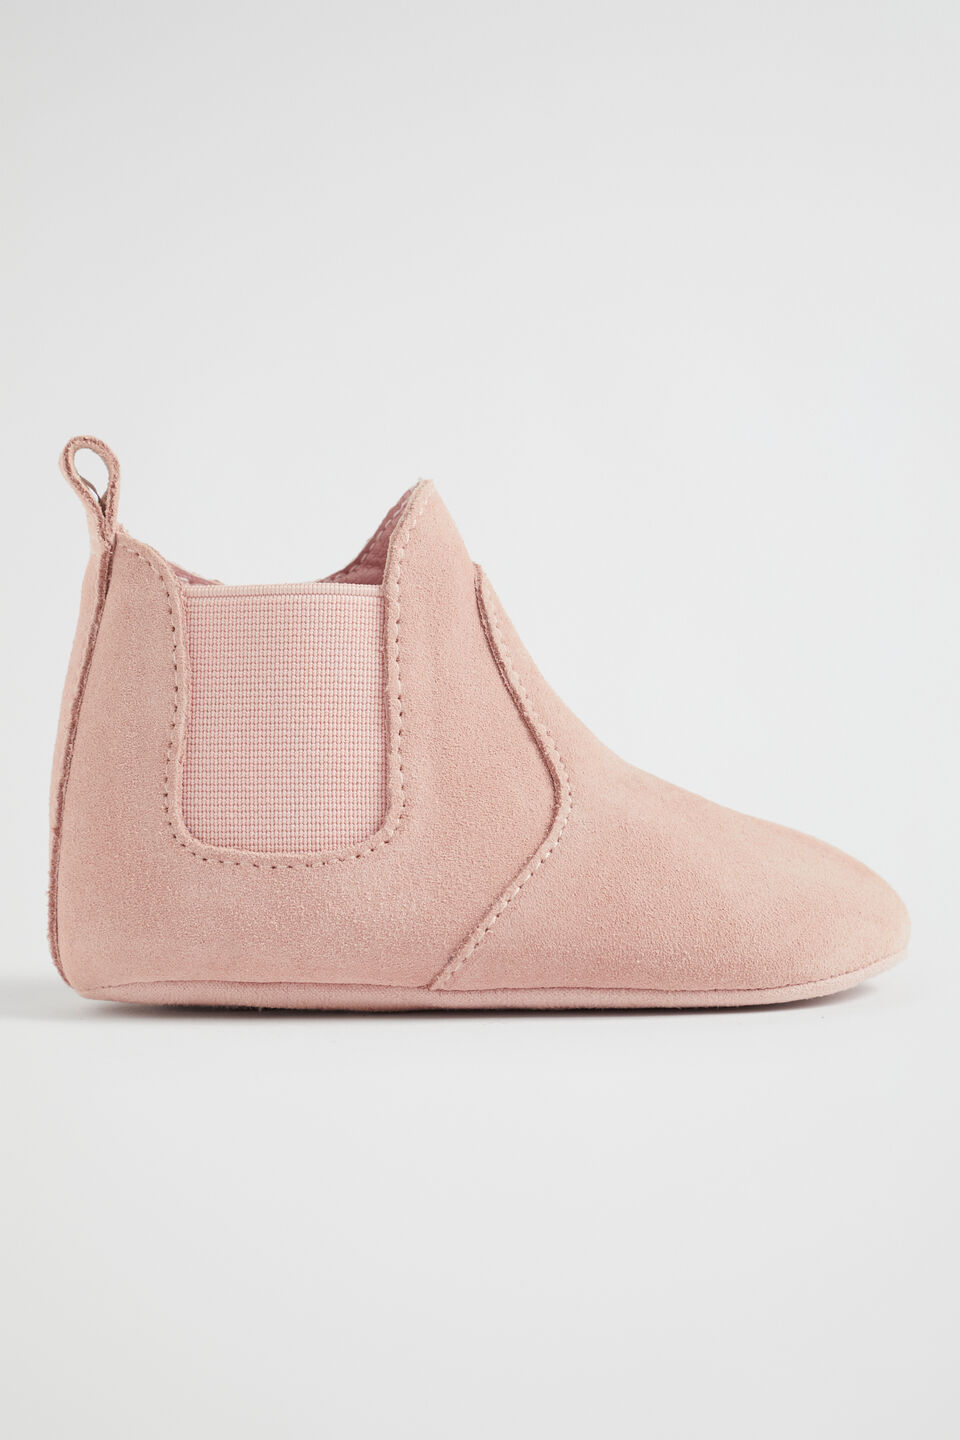 Suede Gusset Bootie  Dusty Rose